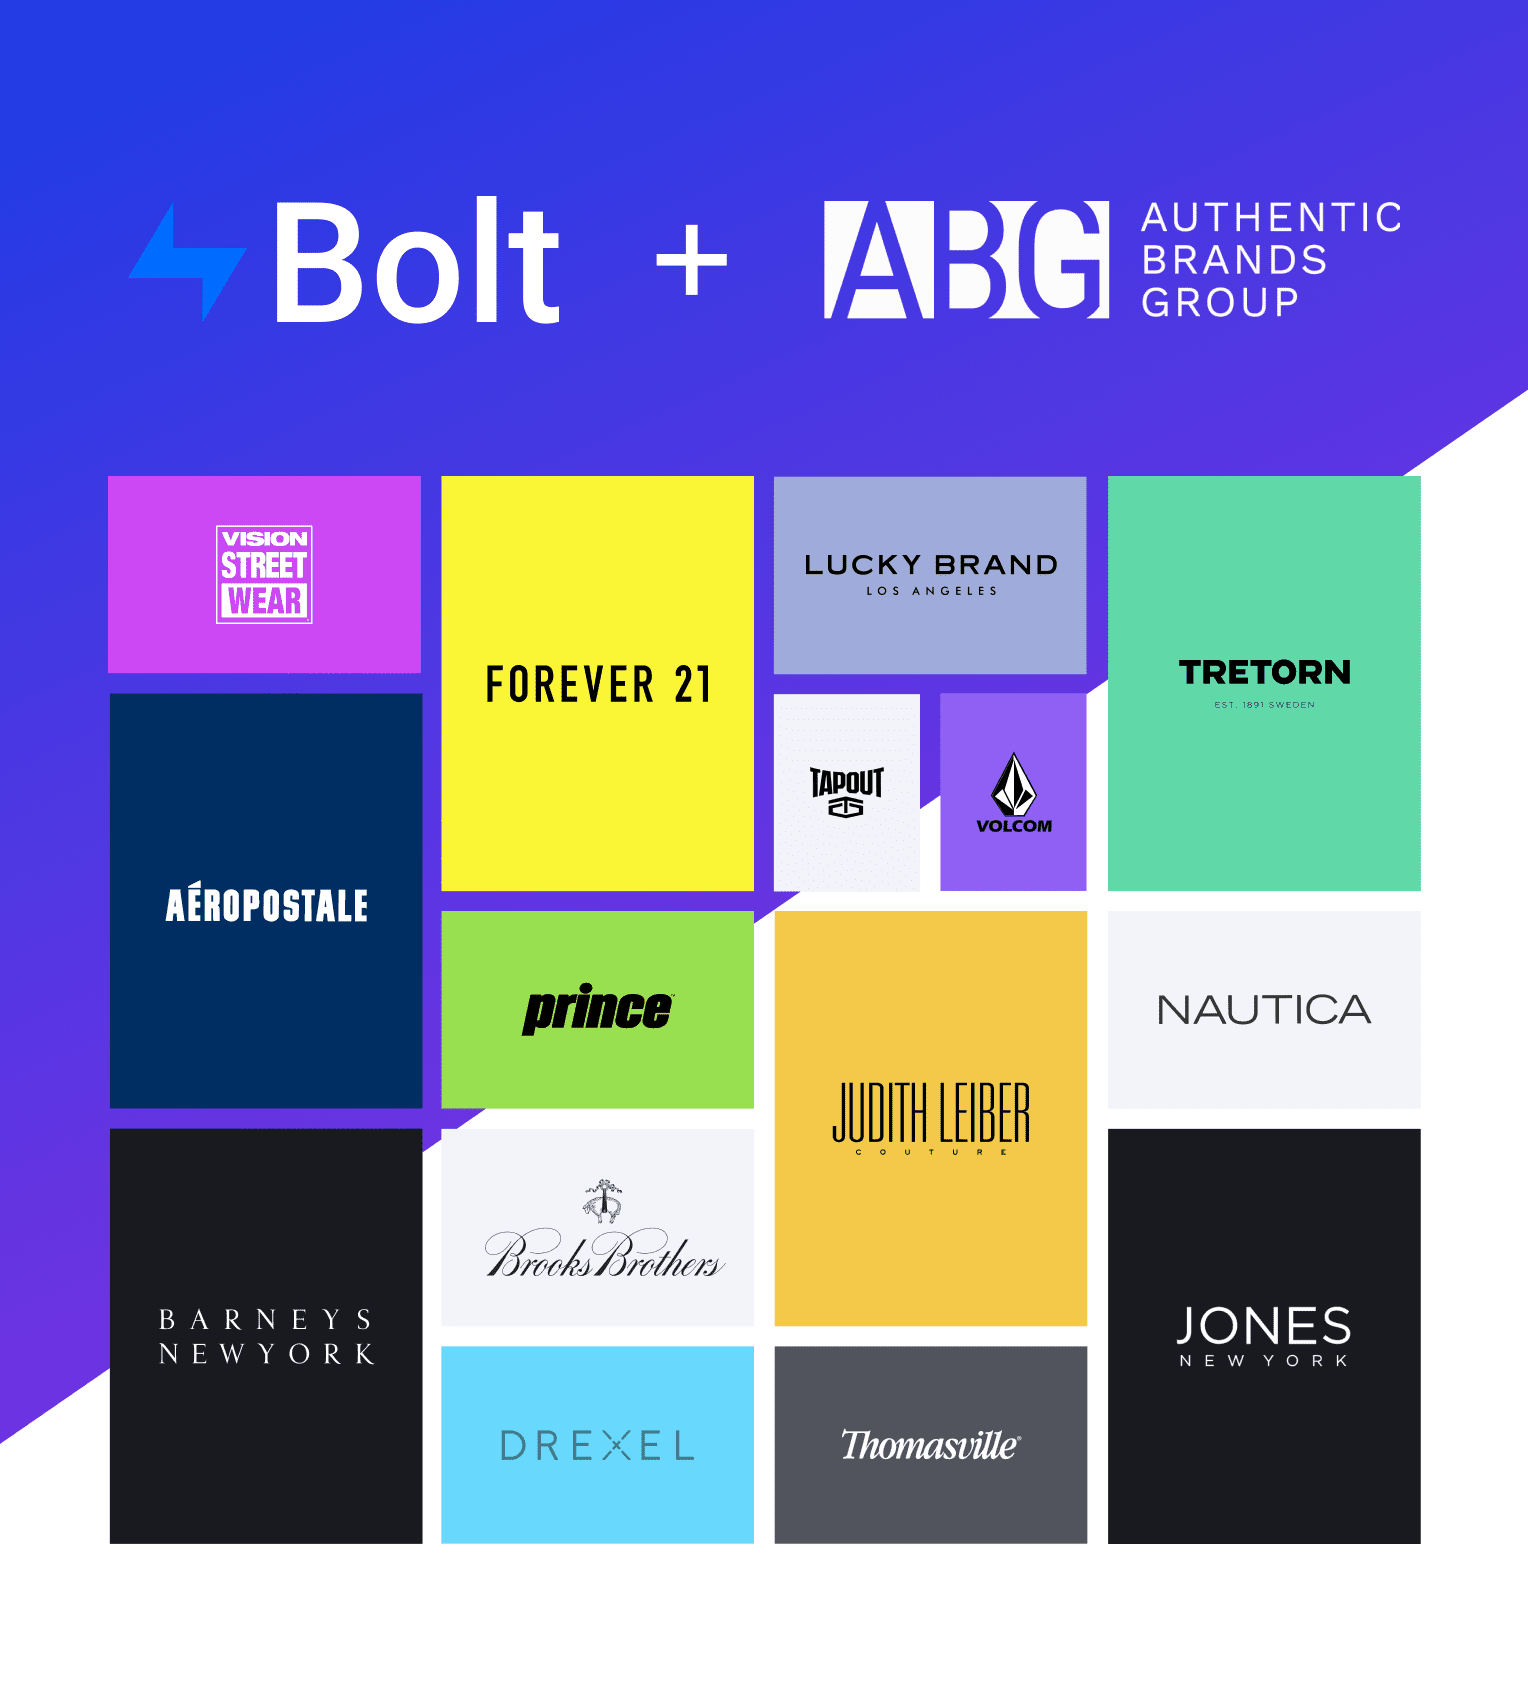 Authentic Brands Group Partners with Bolt to Power Forever 21’s Online Checkout Experience